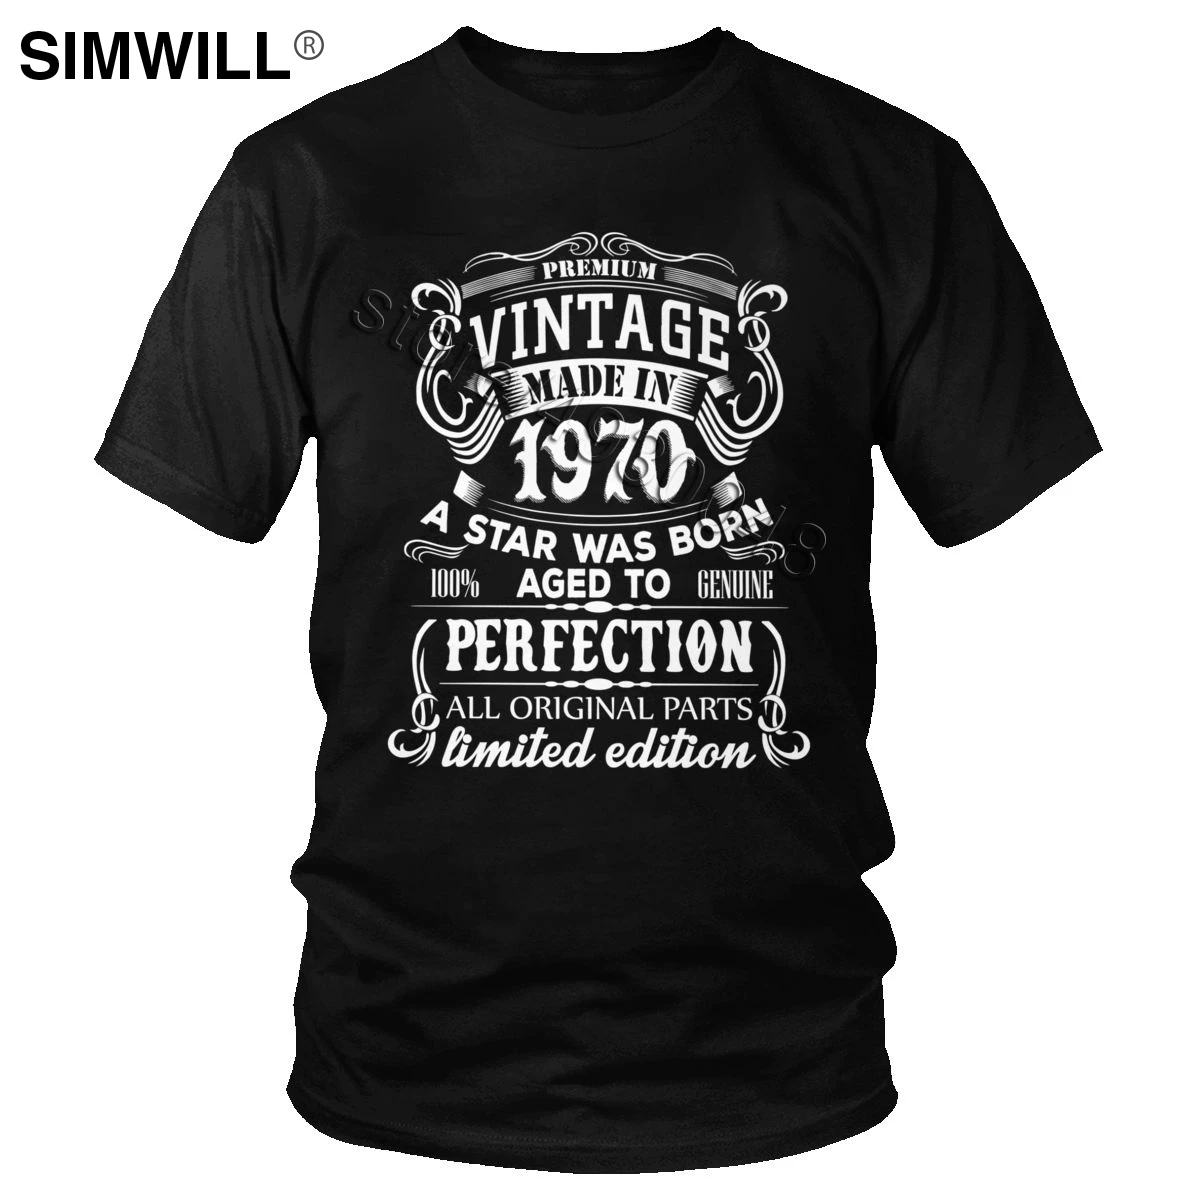 Vintage Made In 1970 50 Years Old T Shirt Men 100% Cotton T-Shirt Short Sleeve 50th Birthday Gift Tee Born In 1970 Tshirt Tops